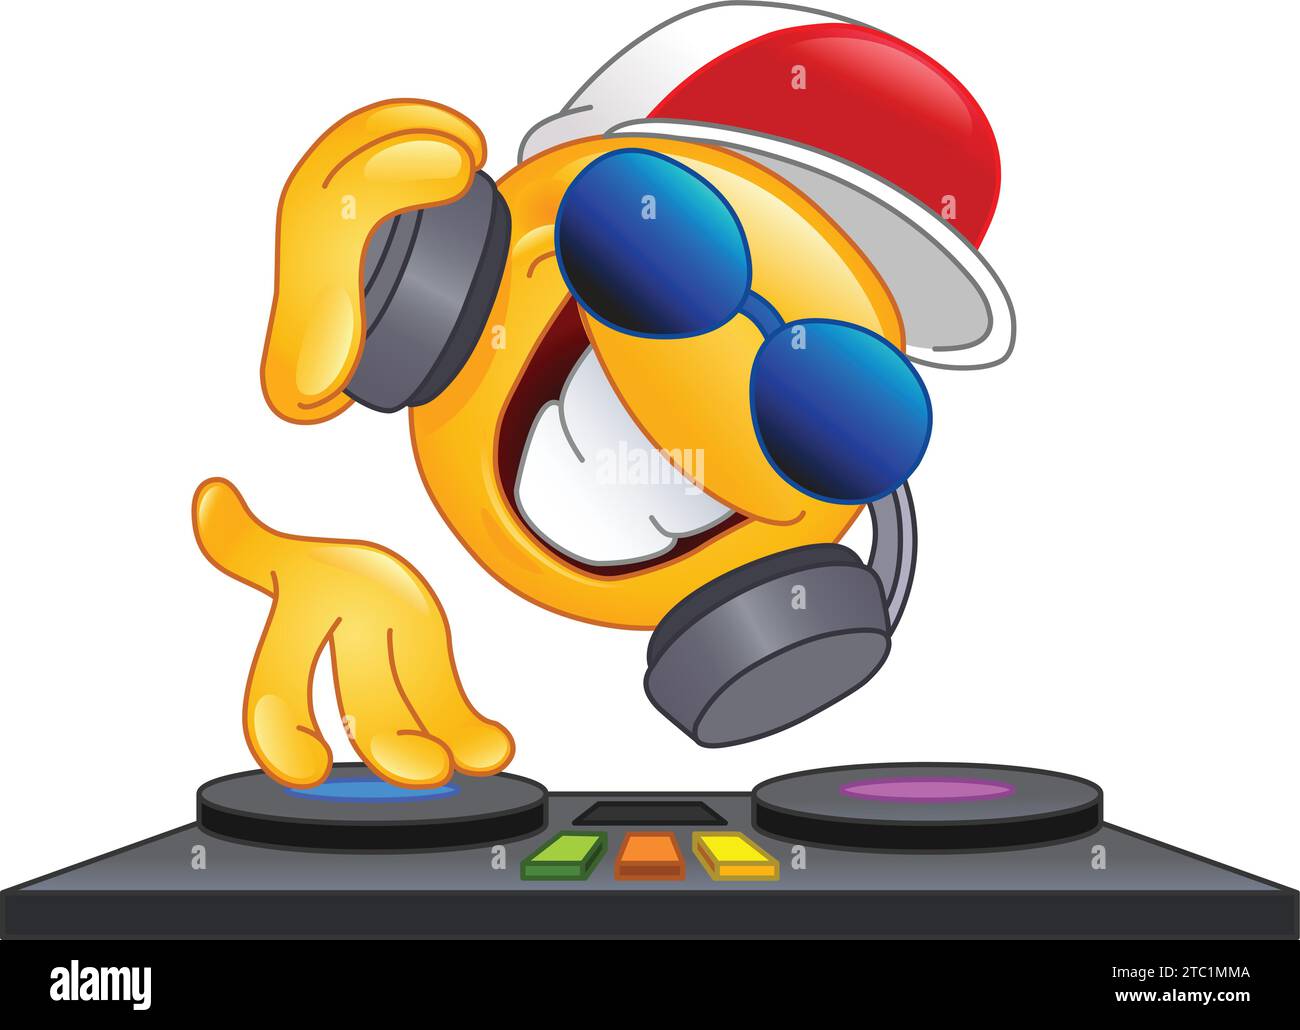 Happy DJ emoji emoticon with headphones and sunglasses, playing and mixing electronic music on the turntables deck Stock Vector